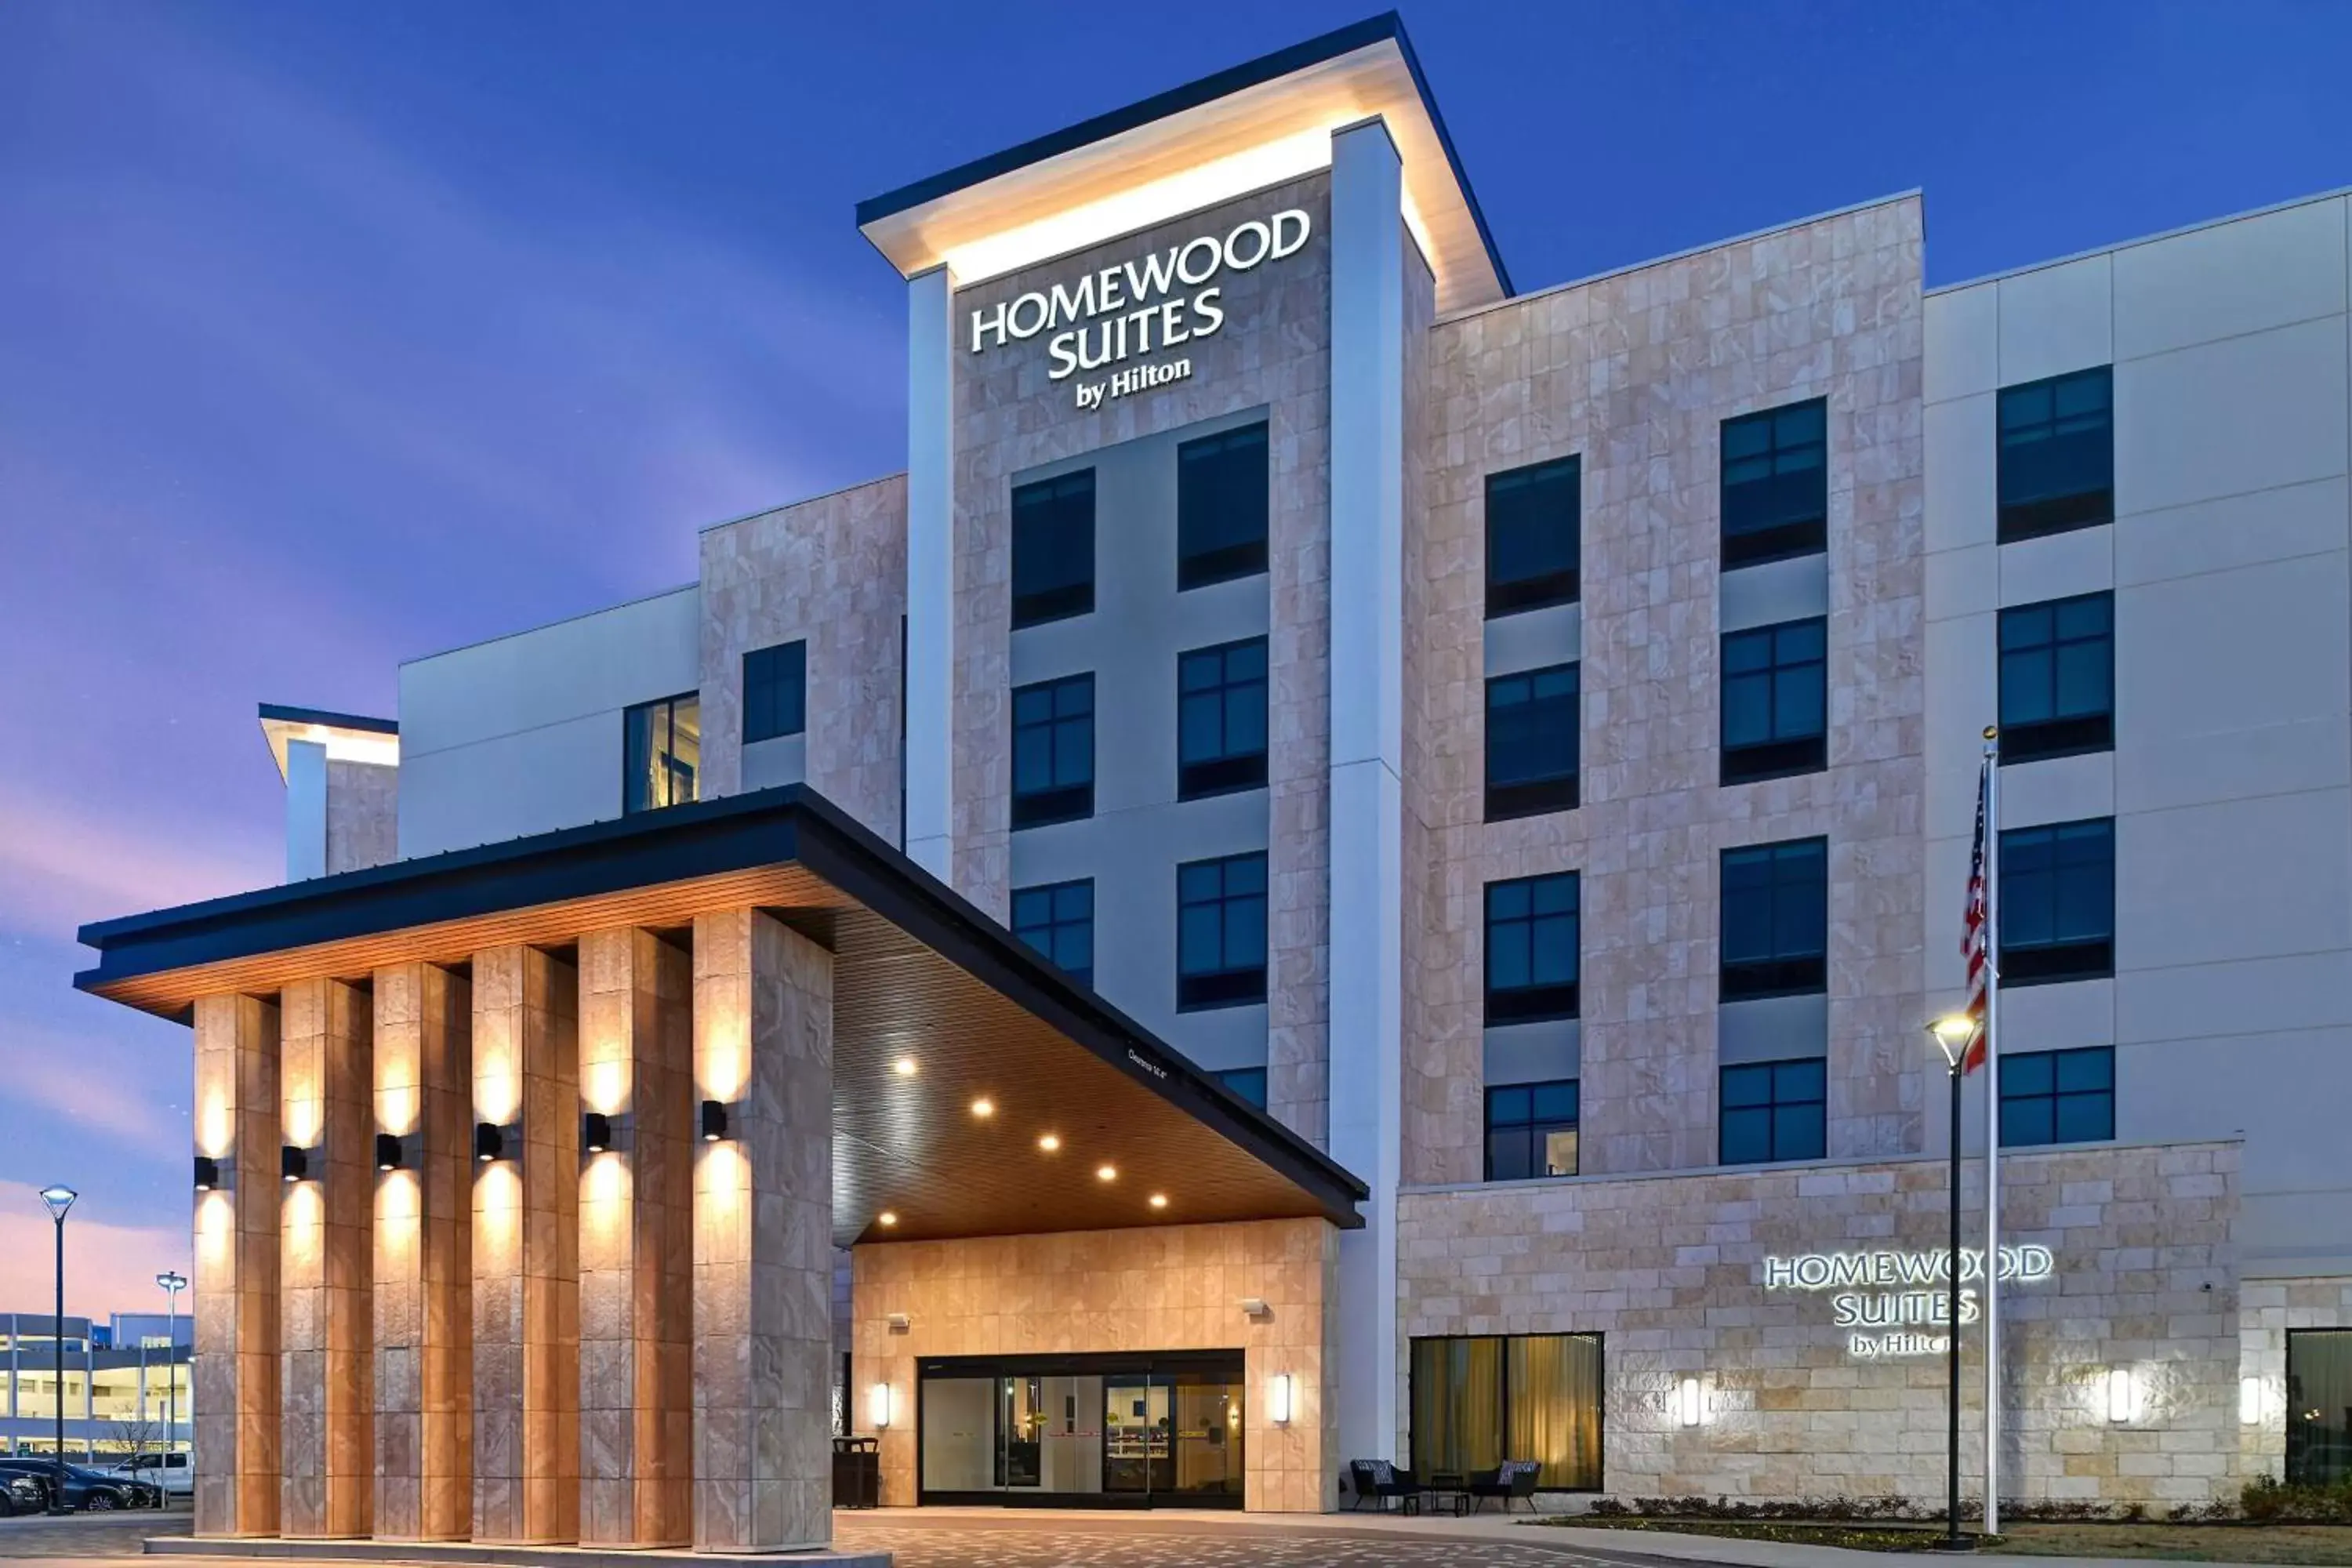 Property Building in Homewood Suites by Hilton Dallas The Colony